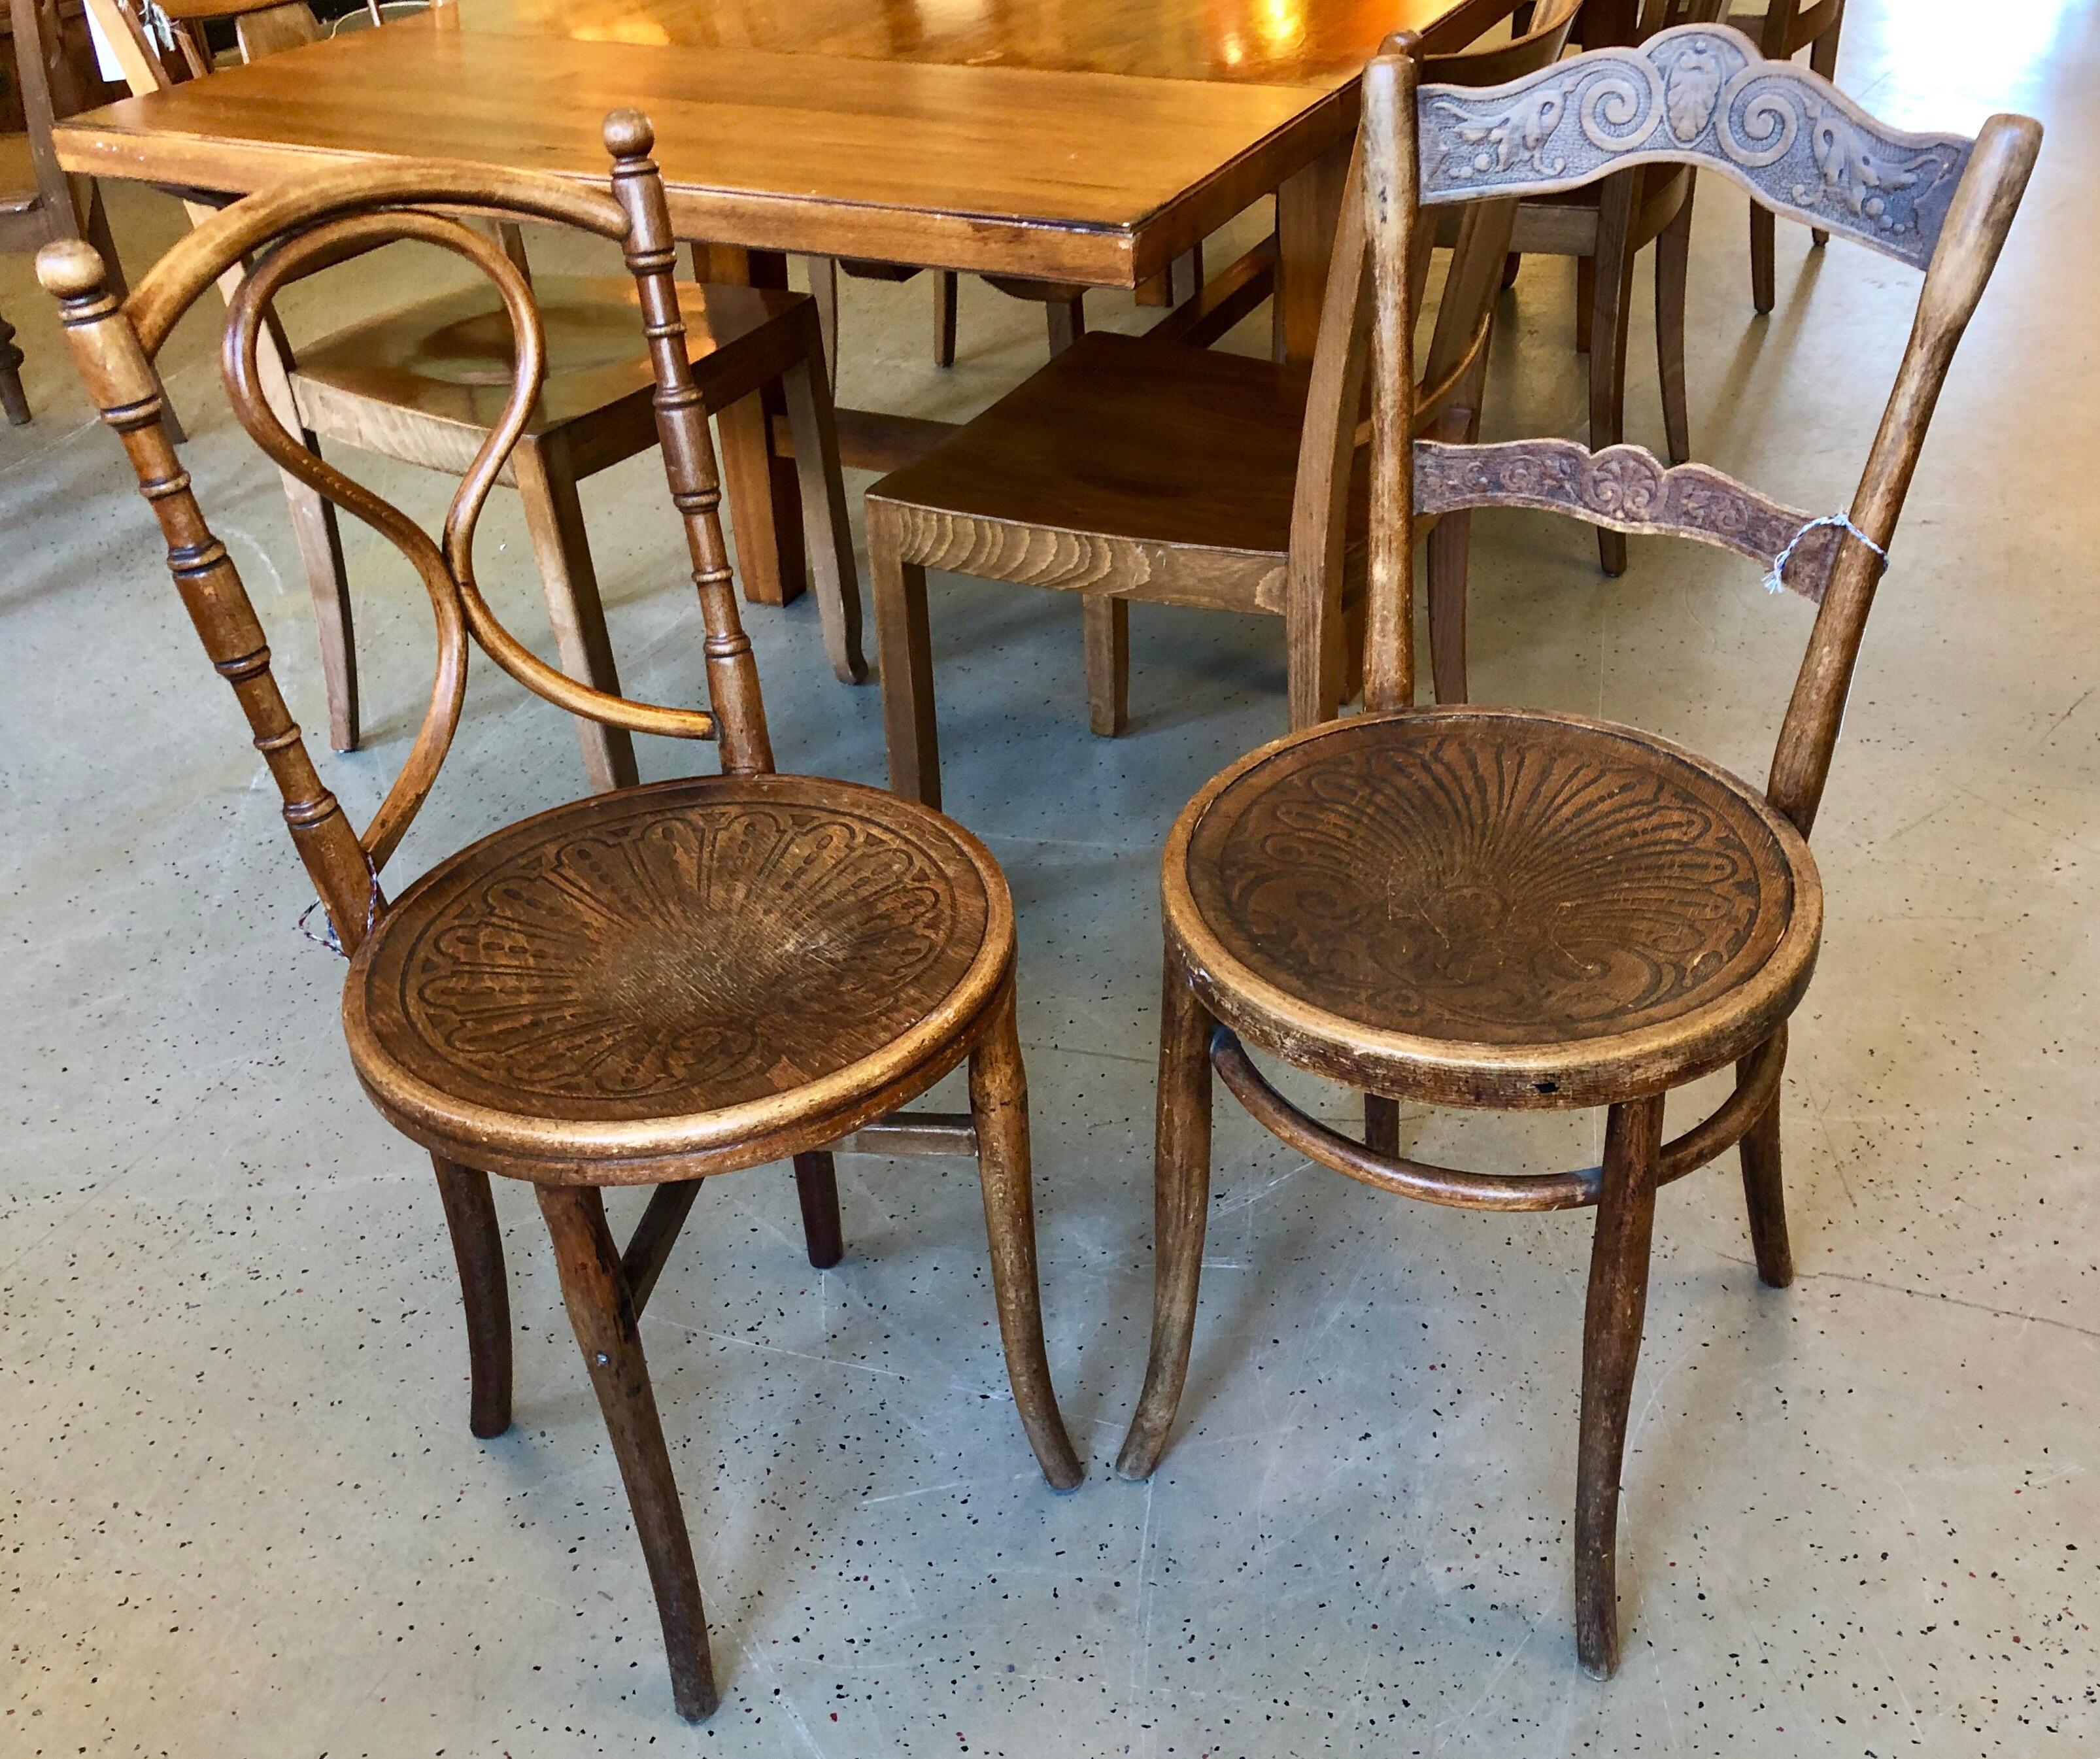 Pair of depression era authentic bistro carved wood chairs.